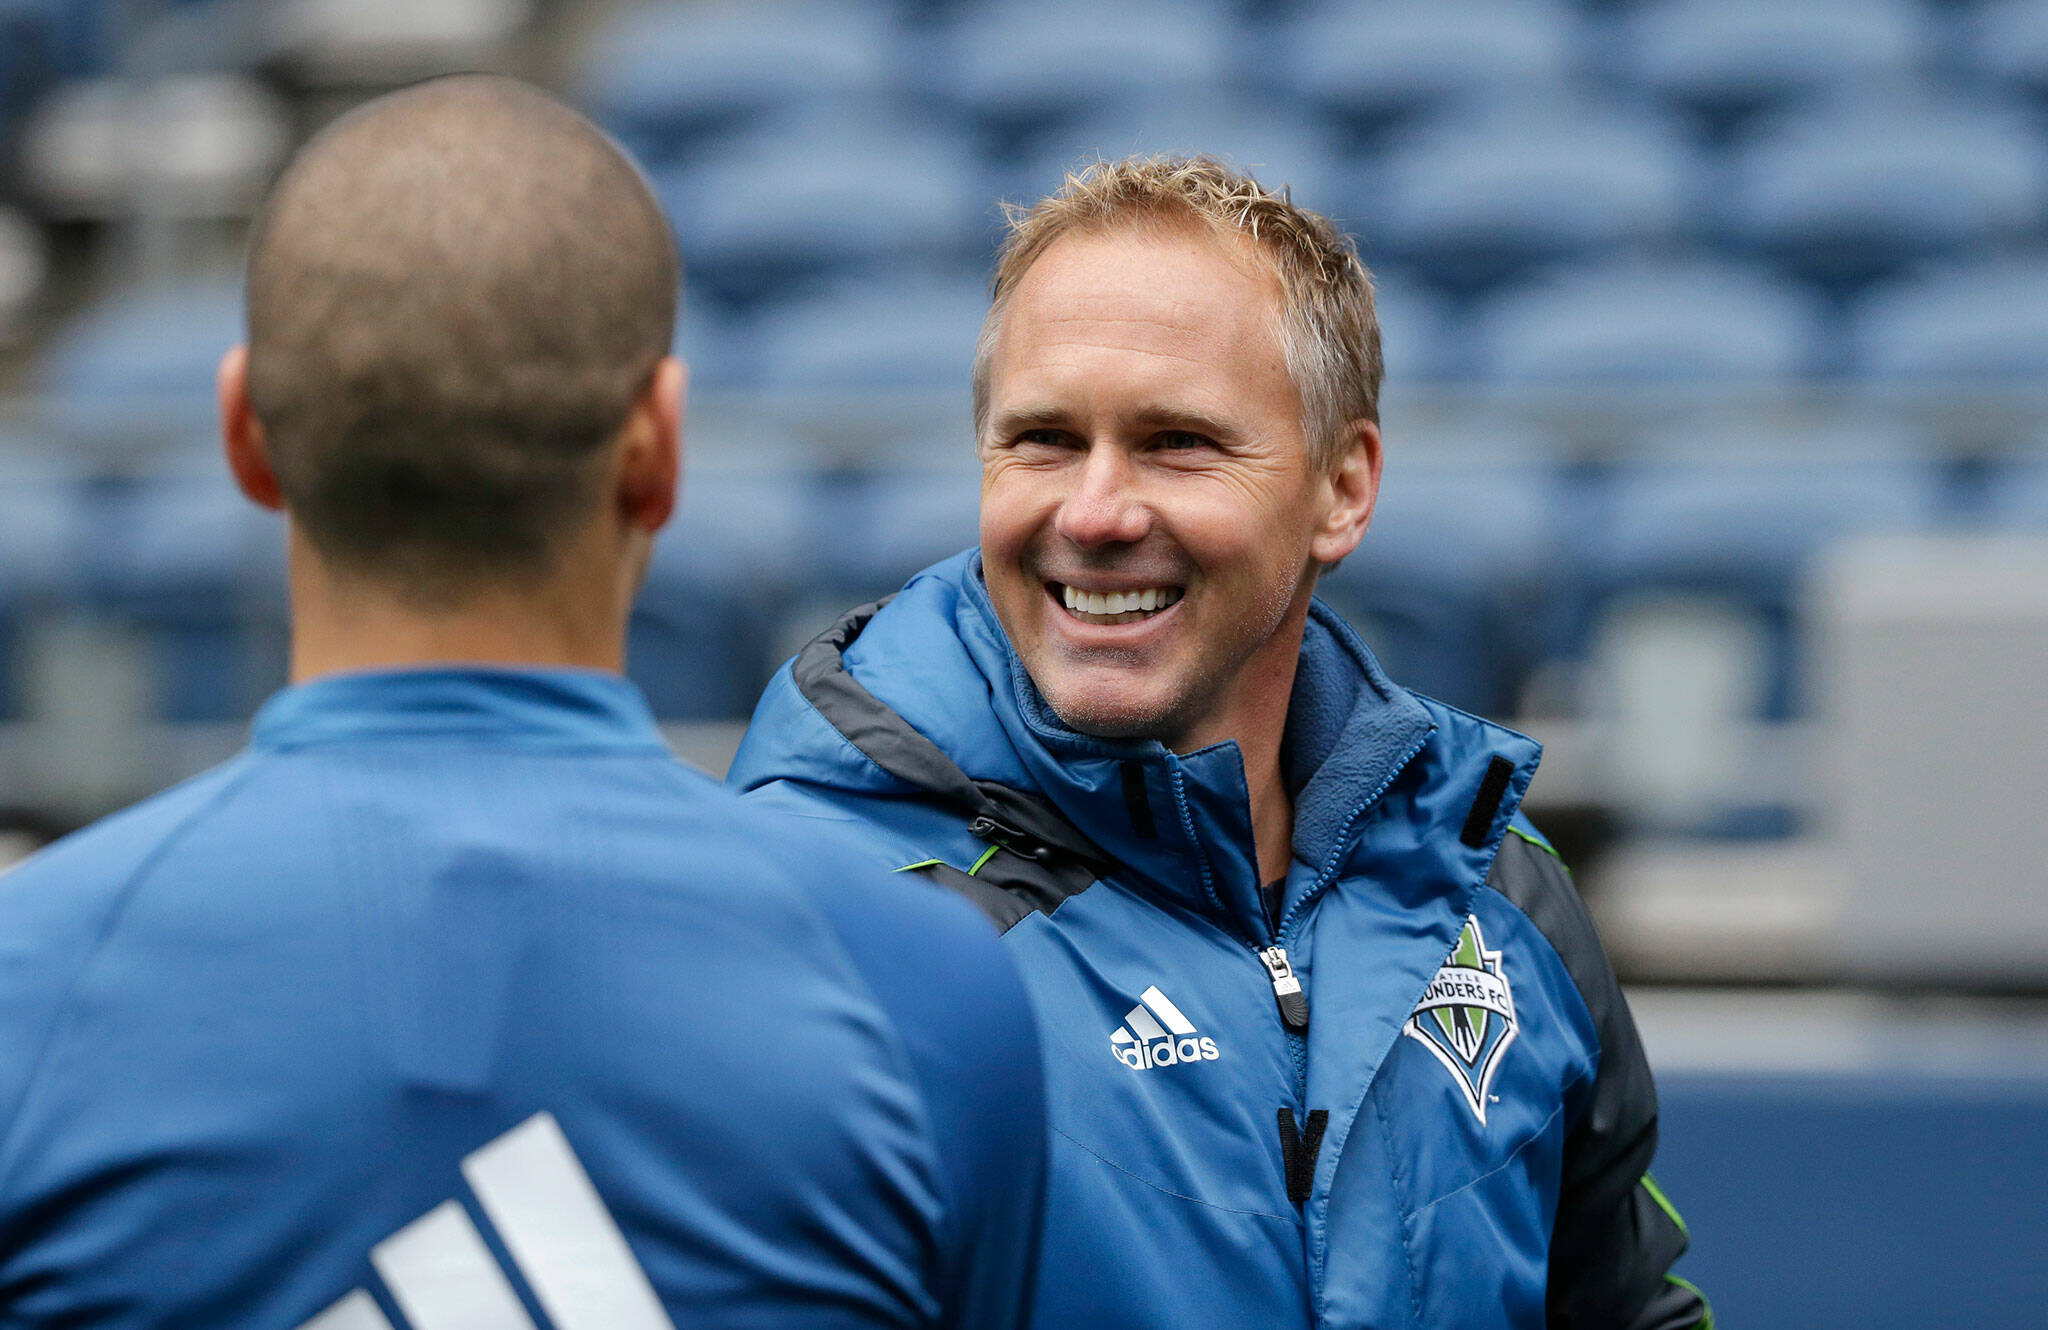 Fromer Seattle Sounders sporting director Chris Henderson, a Cascade High School alum, greets a player after a soccer training session Feb. 22, 2016, in Seattle. Henderson is now the sporting director of Inter Miami. (AP Photo/Elaine Thompson)